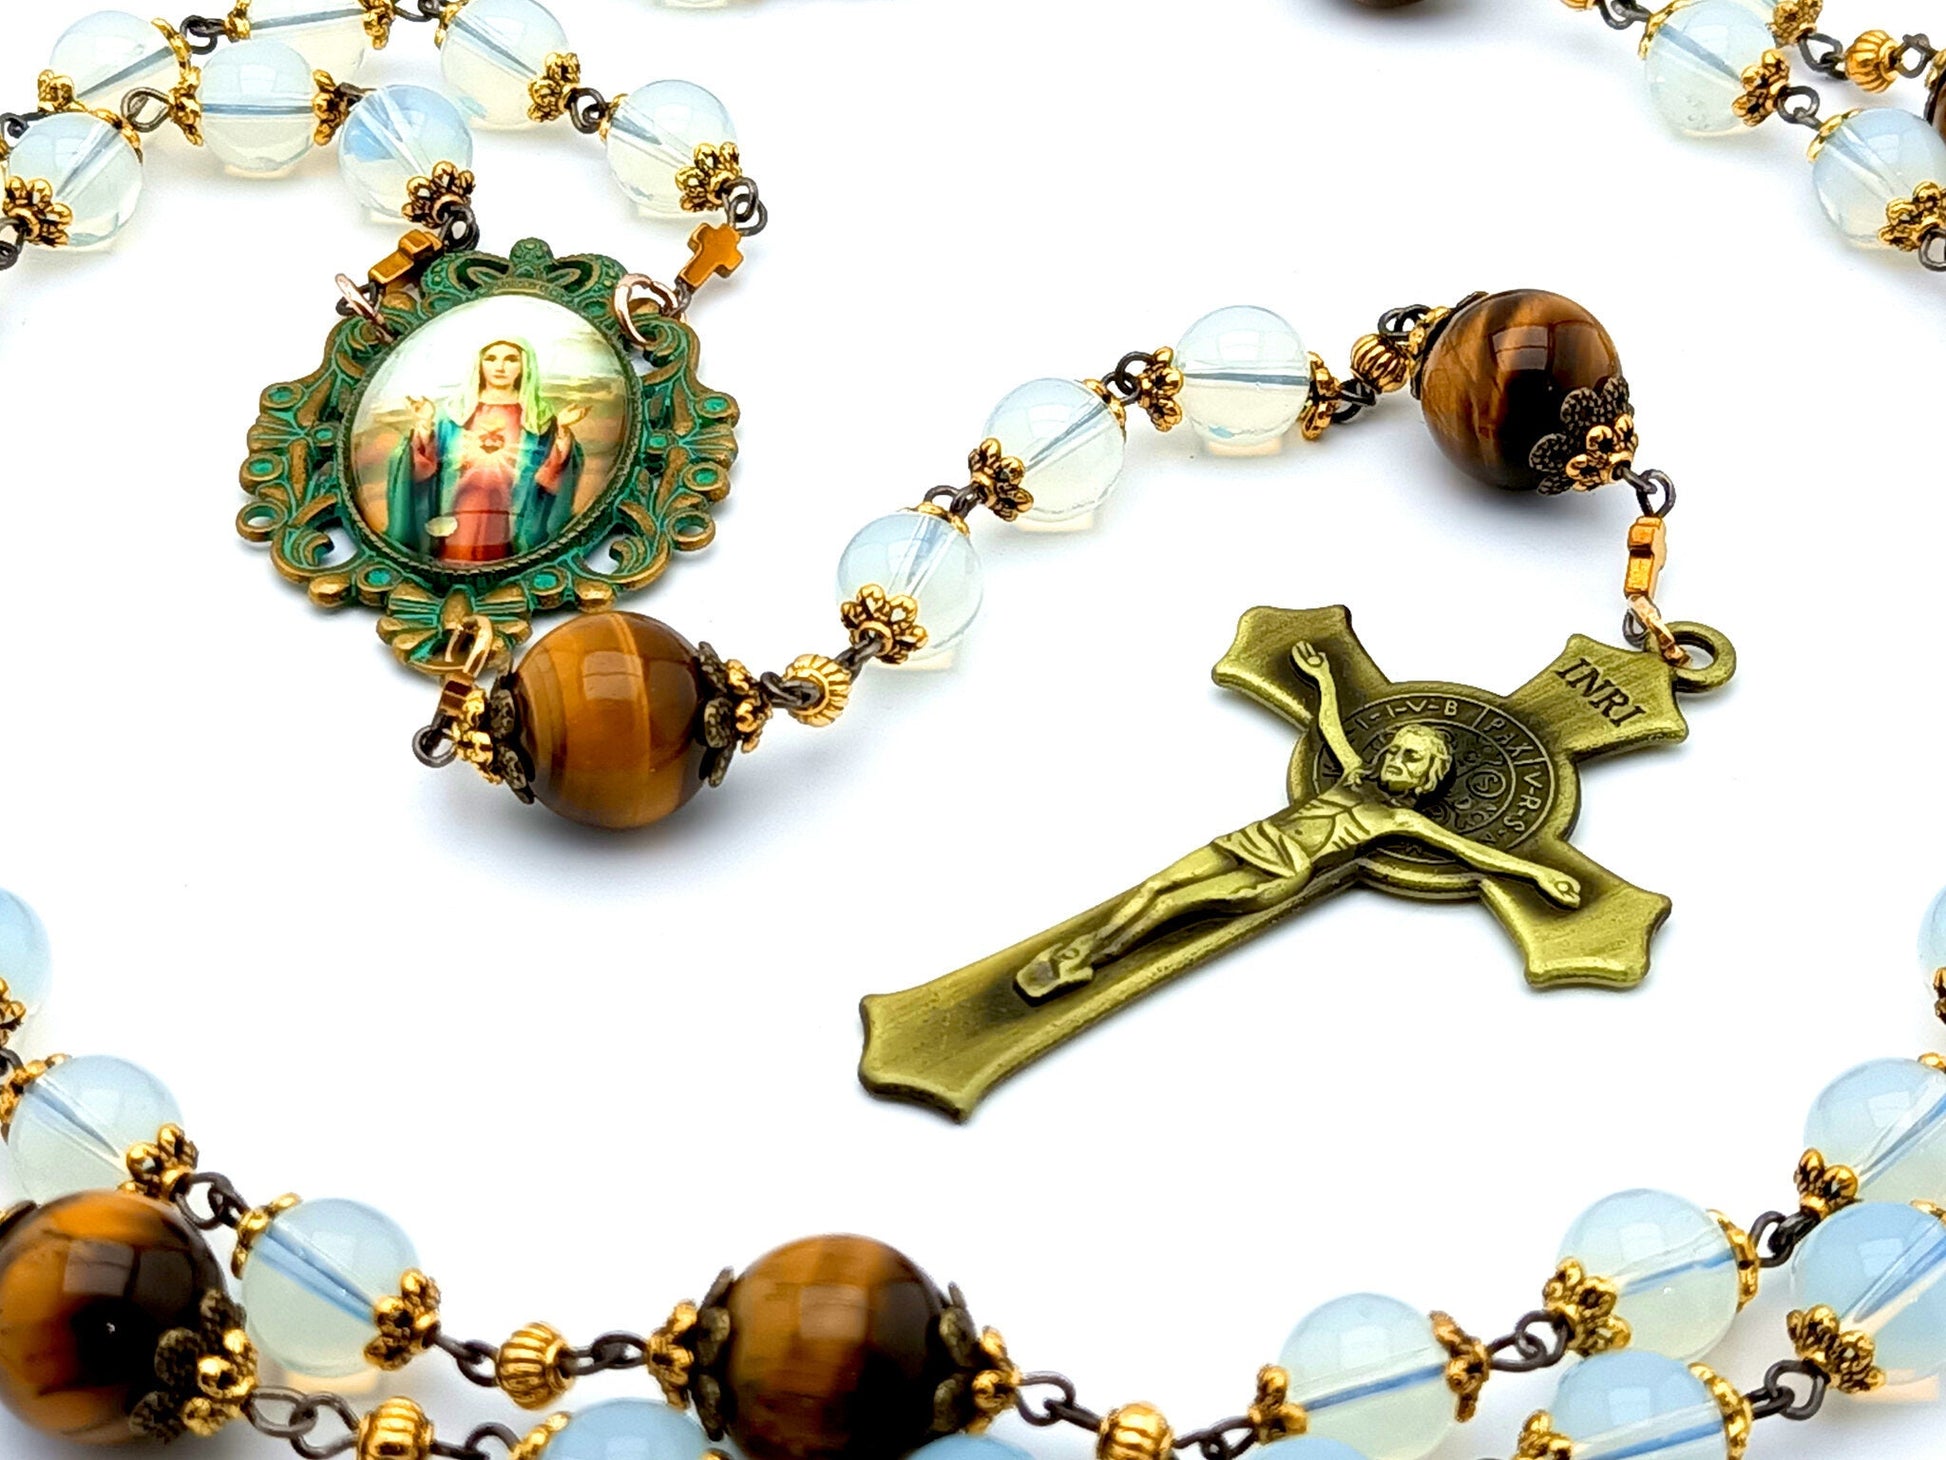 Immaculate Heart of Mary unique rosary beads with opal and tigers eye gemstone beads, bronze crucifix and verdigris picture centre medal.